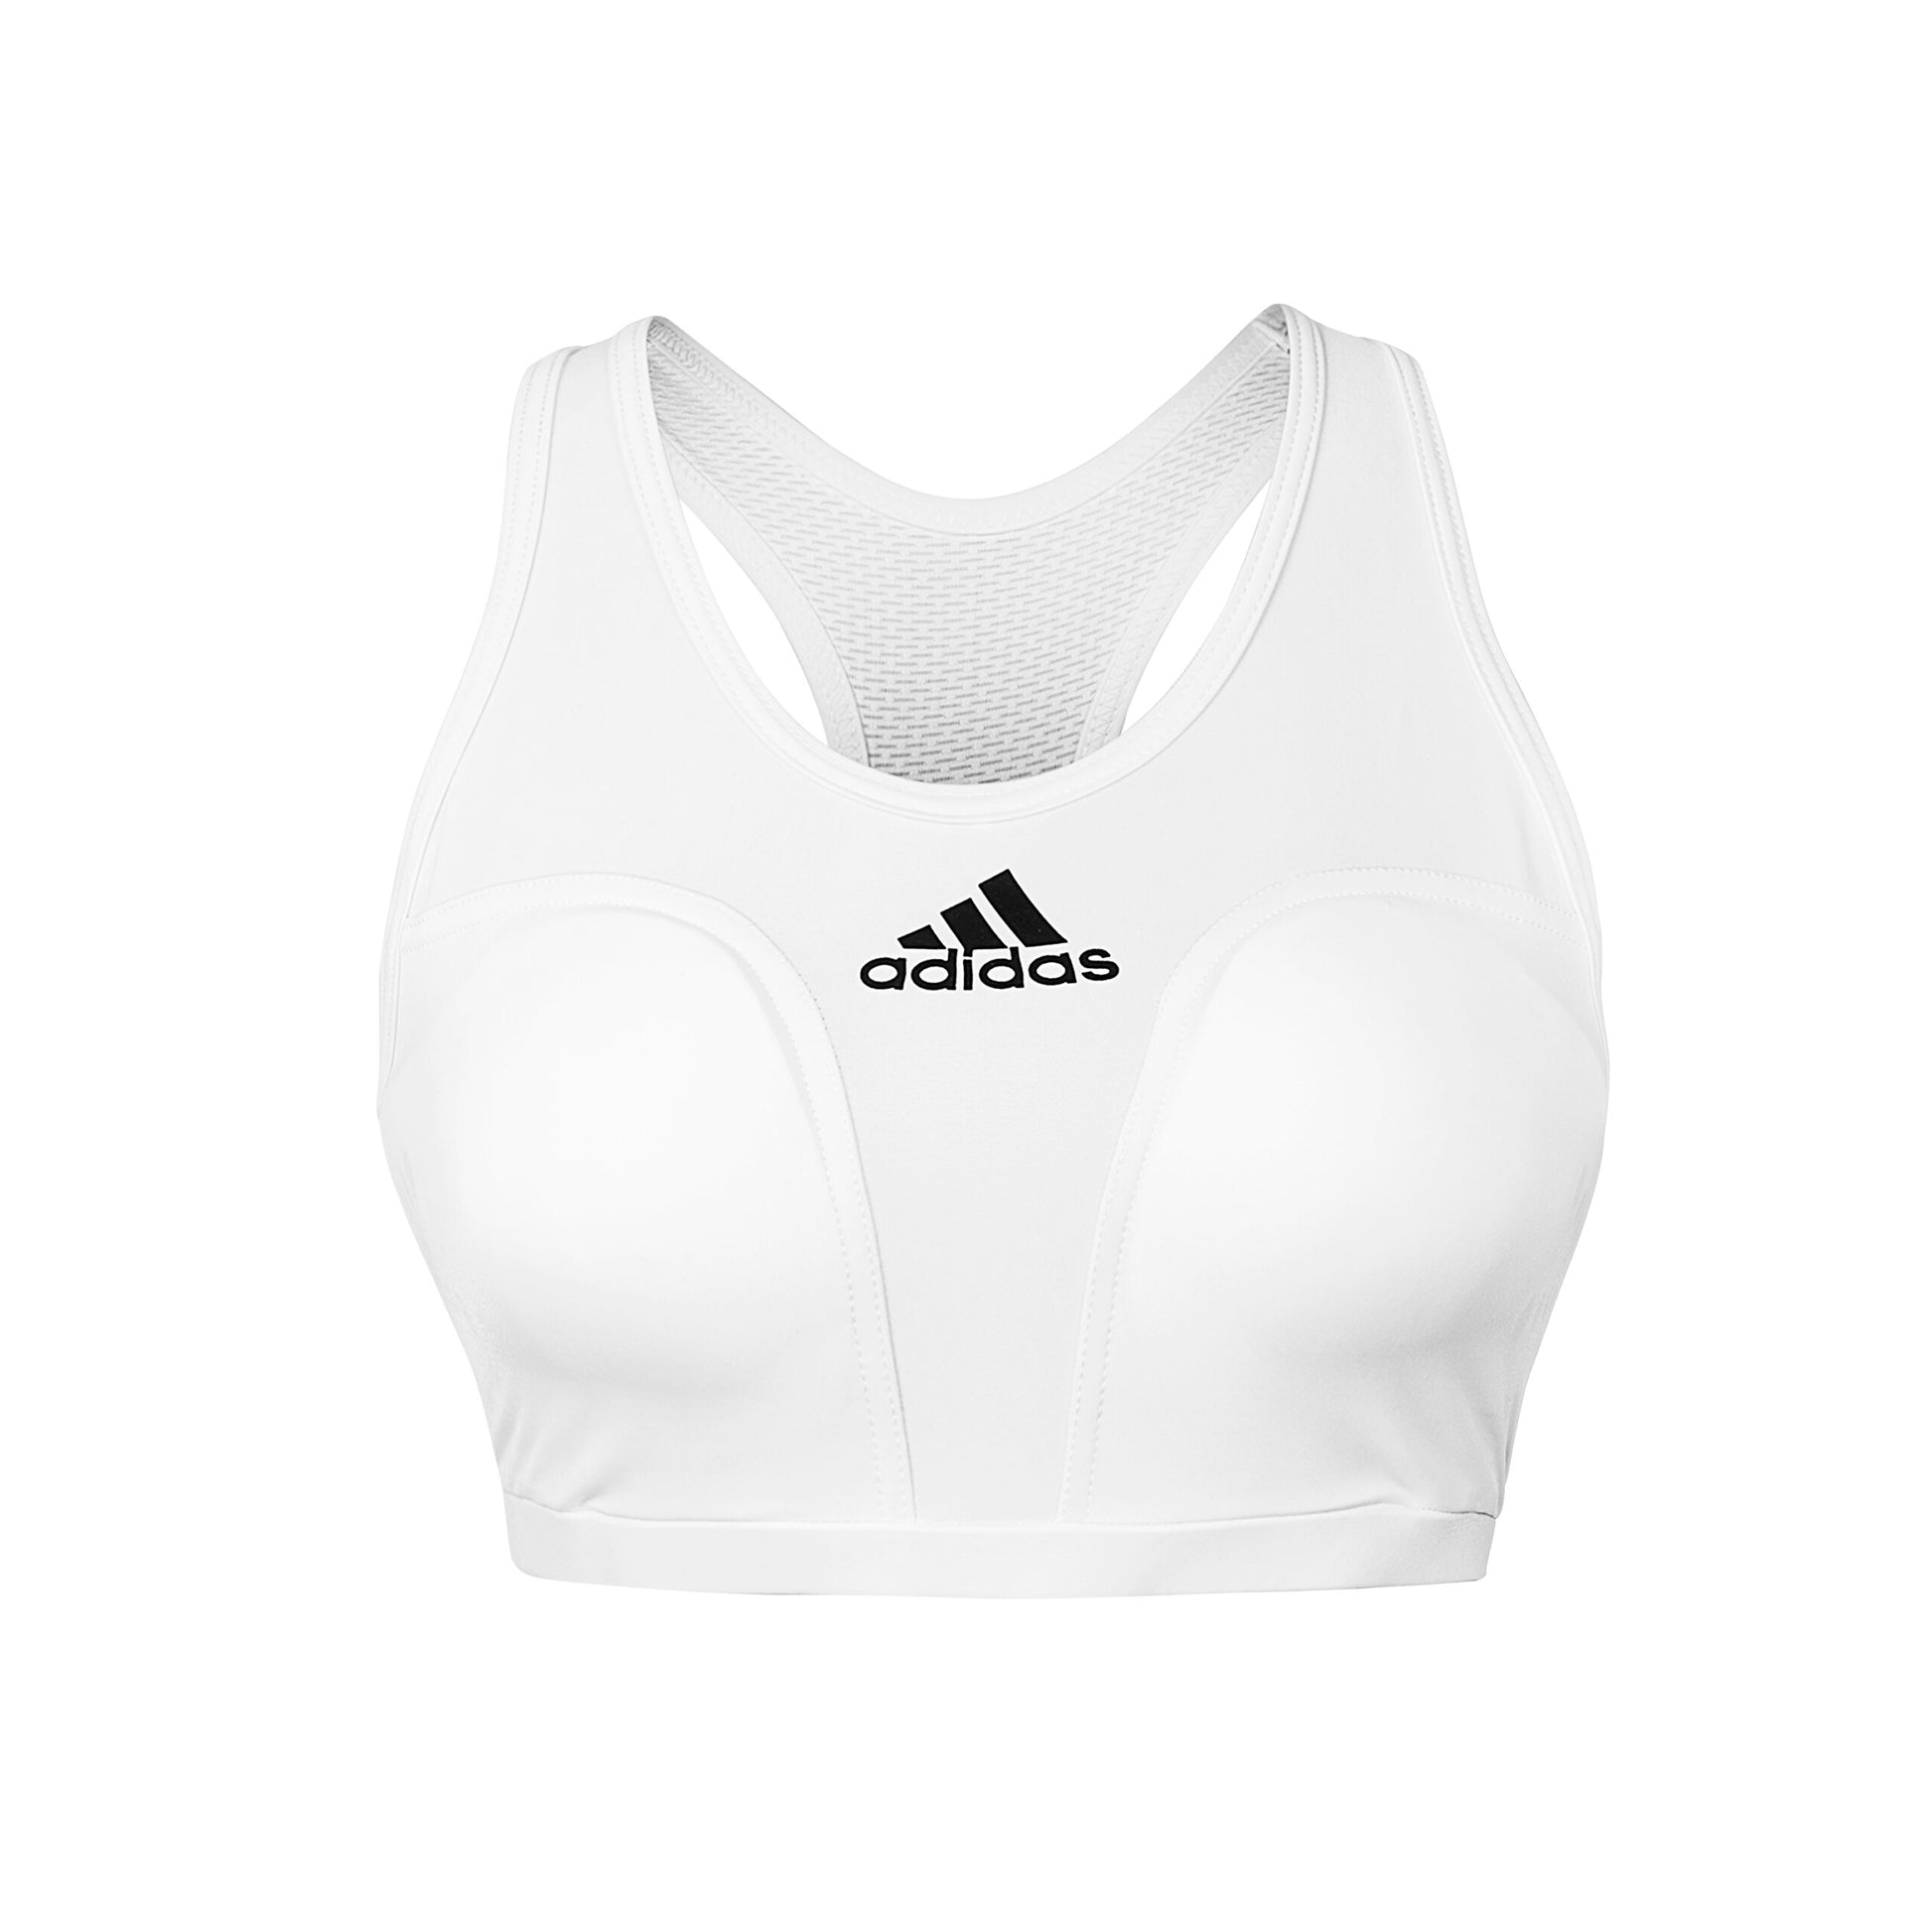 Adibp12 Adidas Wkf Approved Female Breast Protector White 01